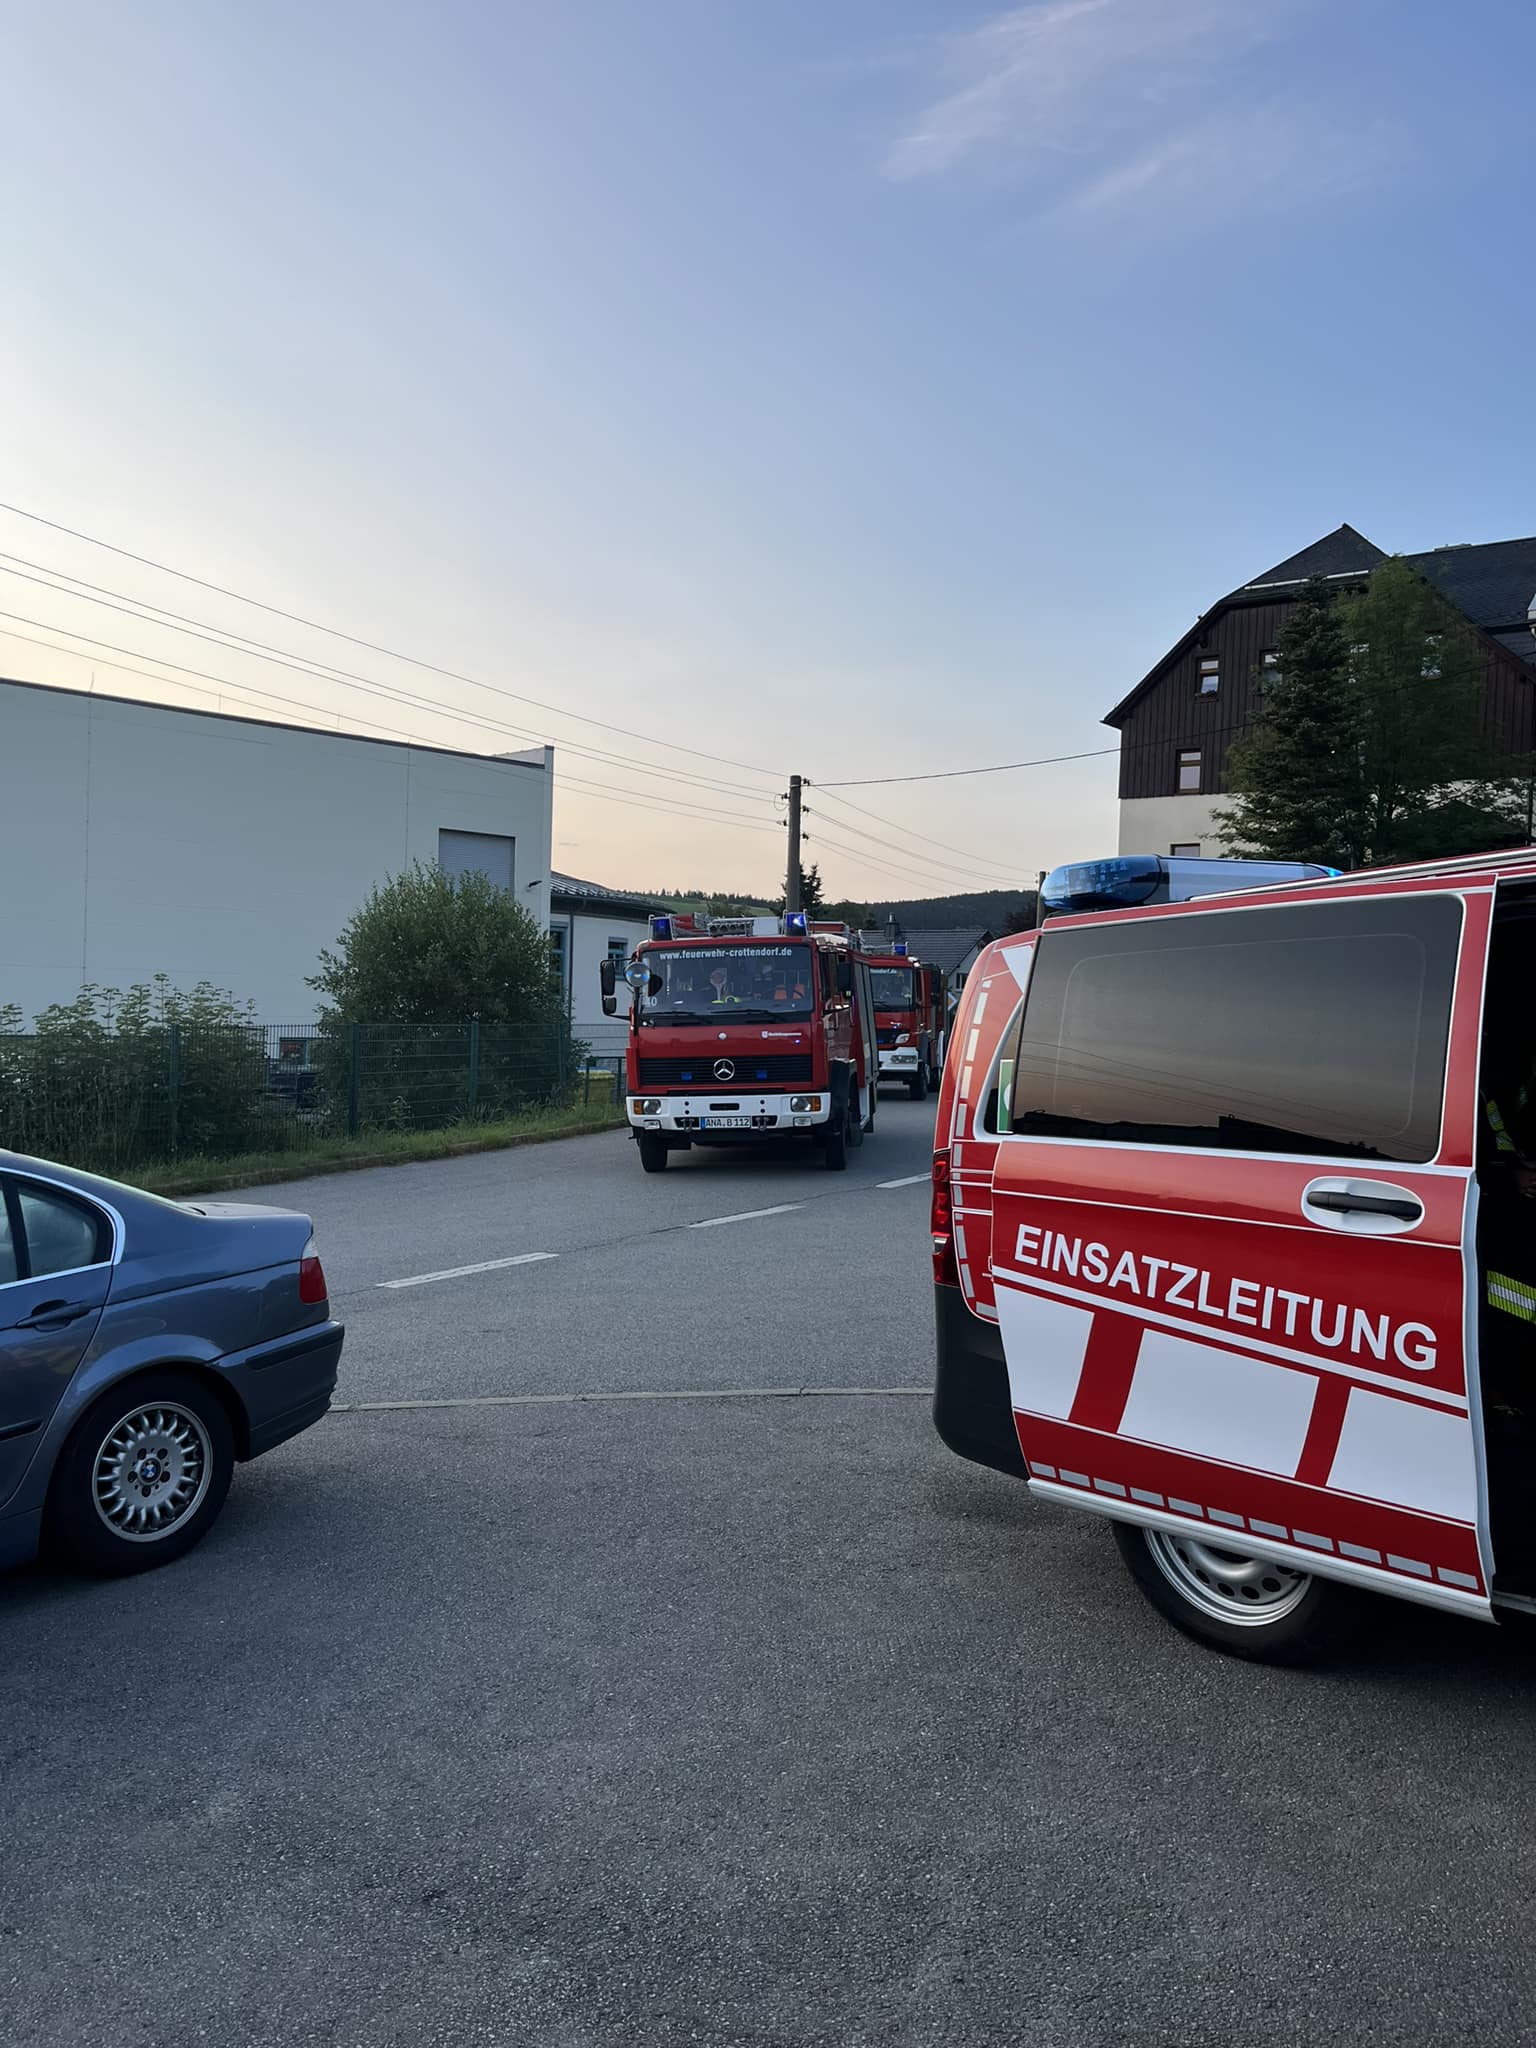 You are currently viewing Brand klein – Crottendorf – unklare Rauchwentwicklung